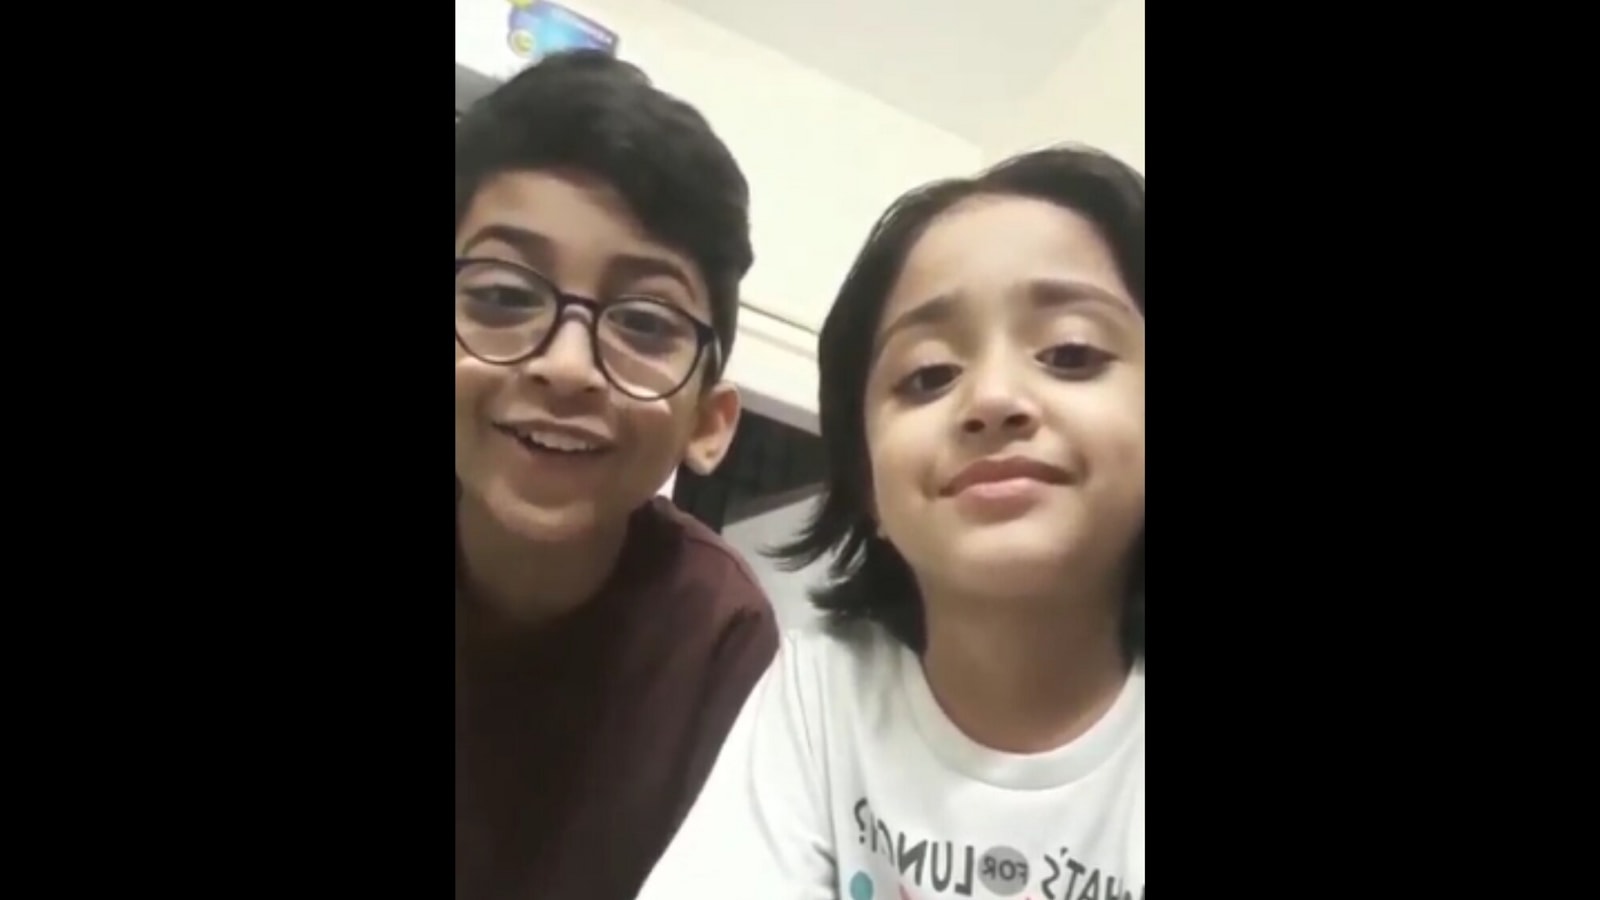 New Brother And Sister Forced Sex In Telugu Videos - Cute little brother-sister duo's video goes viral, Yashraj Mukhate reacts.  Watch | Trending - Hindustan Times